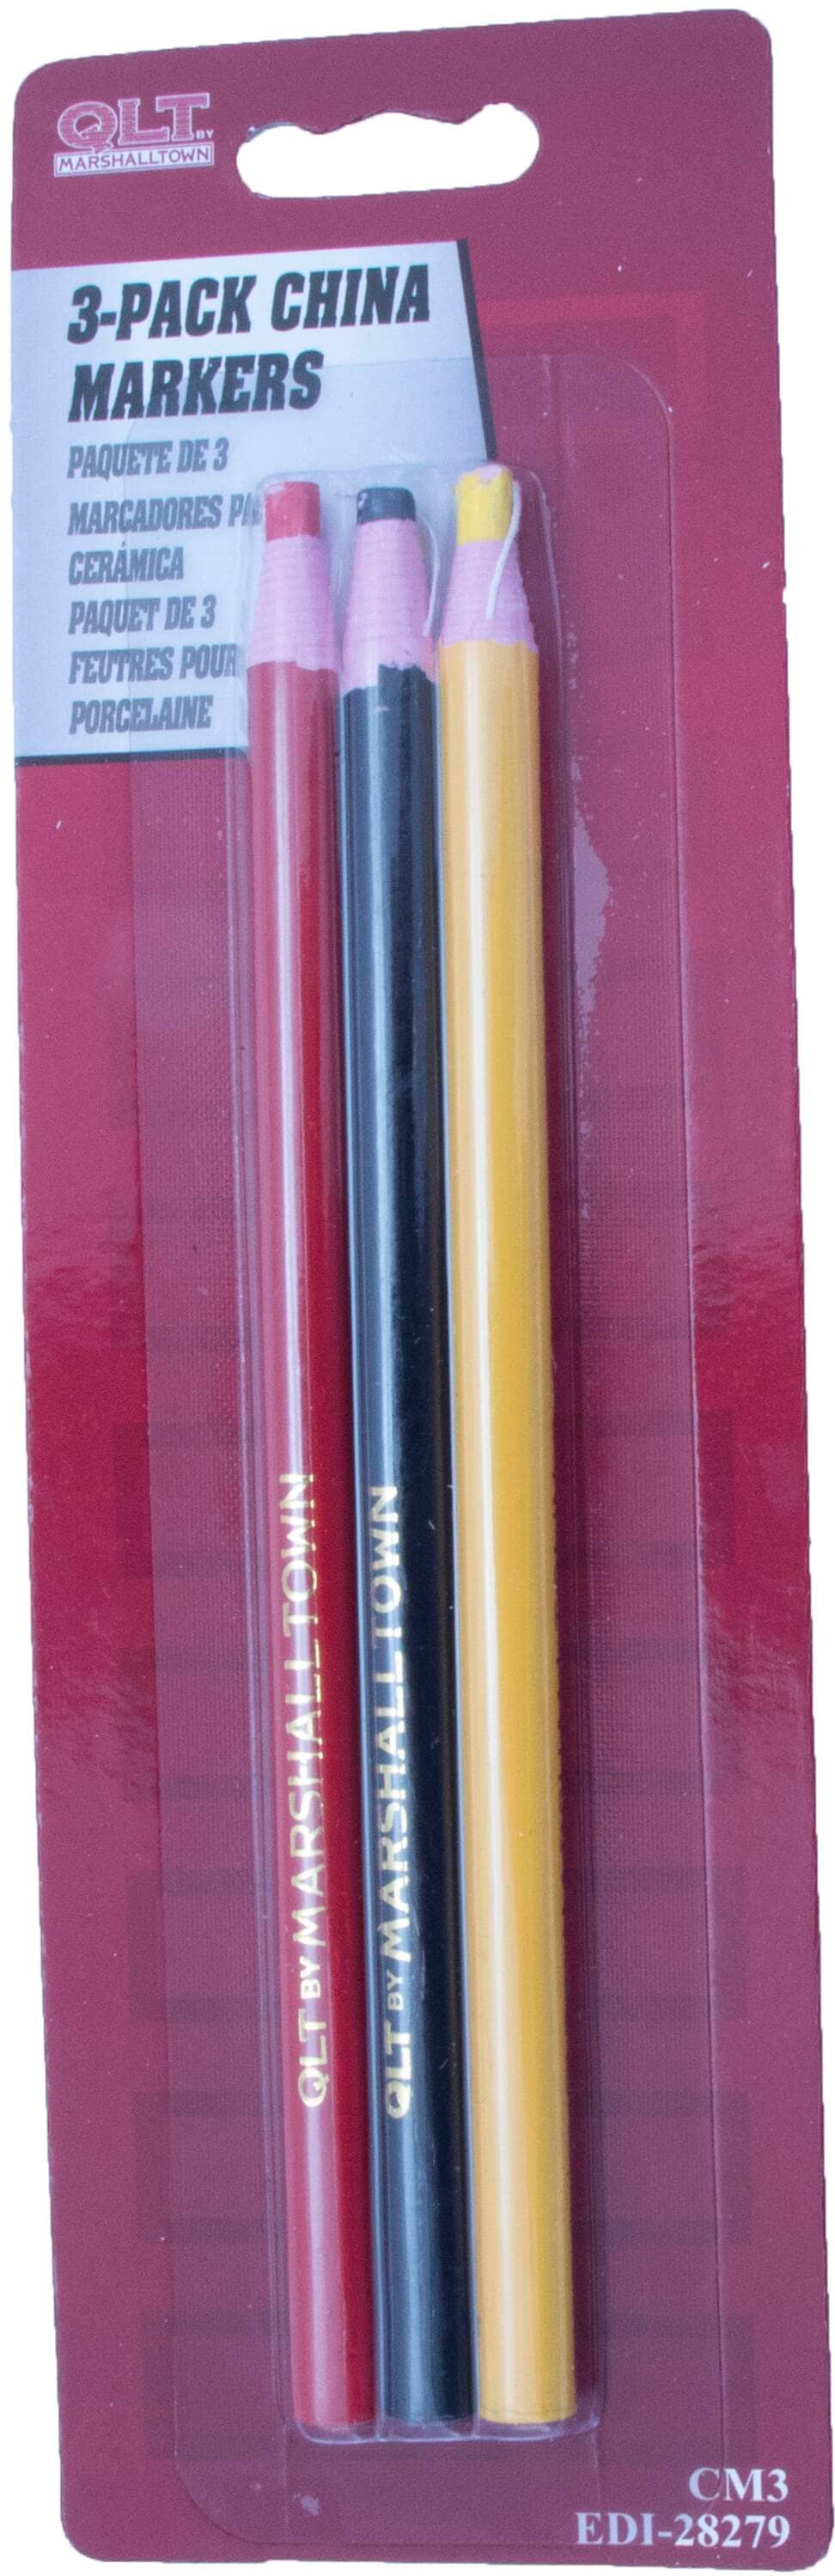 QLT by Marshalltown 3-Pack 6.65-in Red, Yellow, Black China Marker